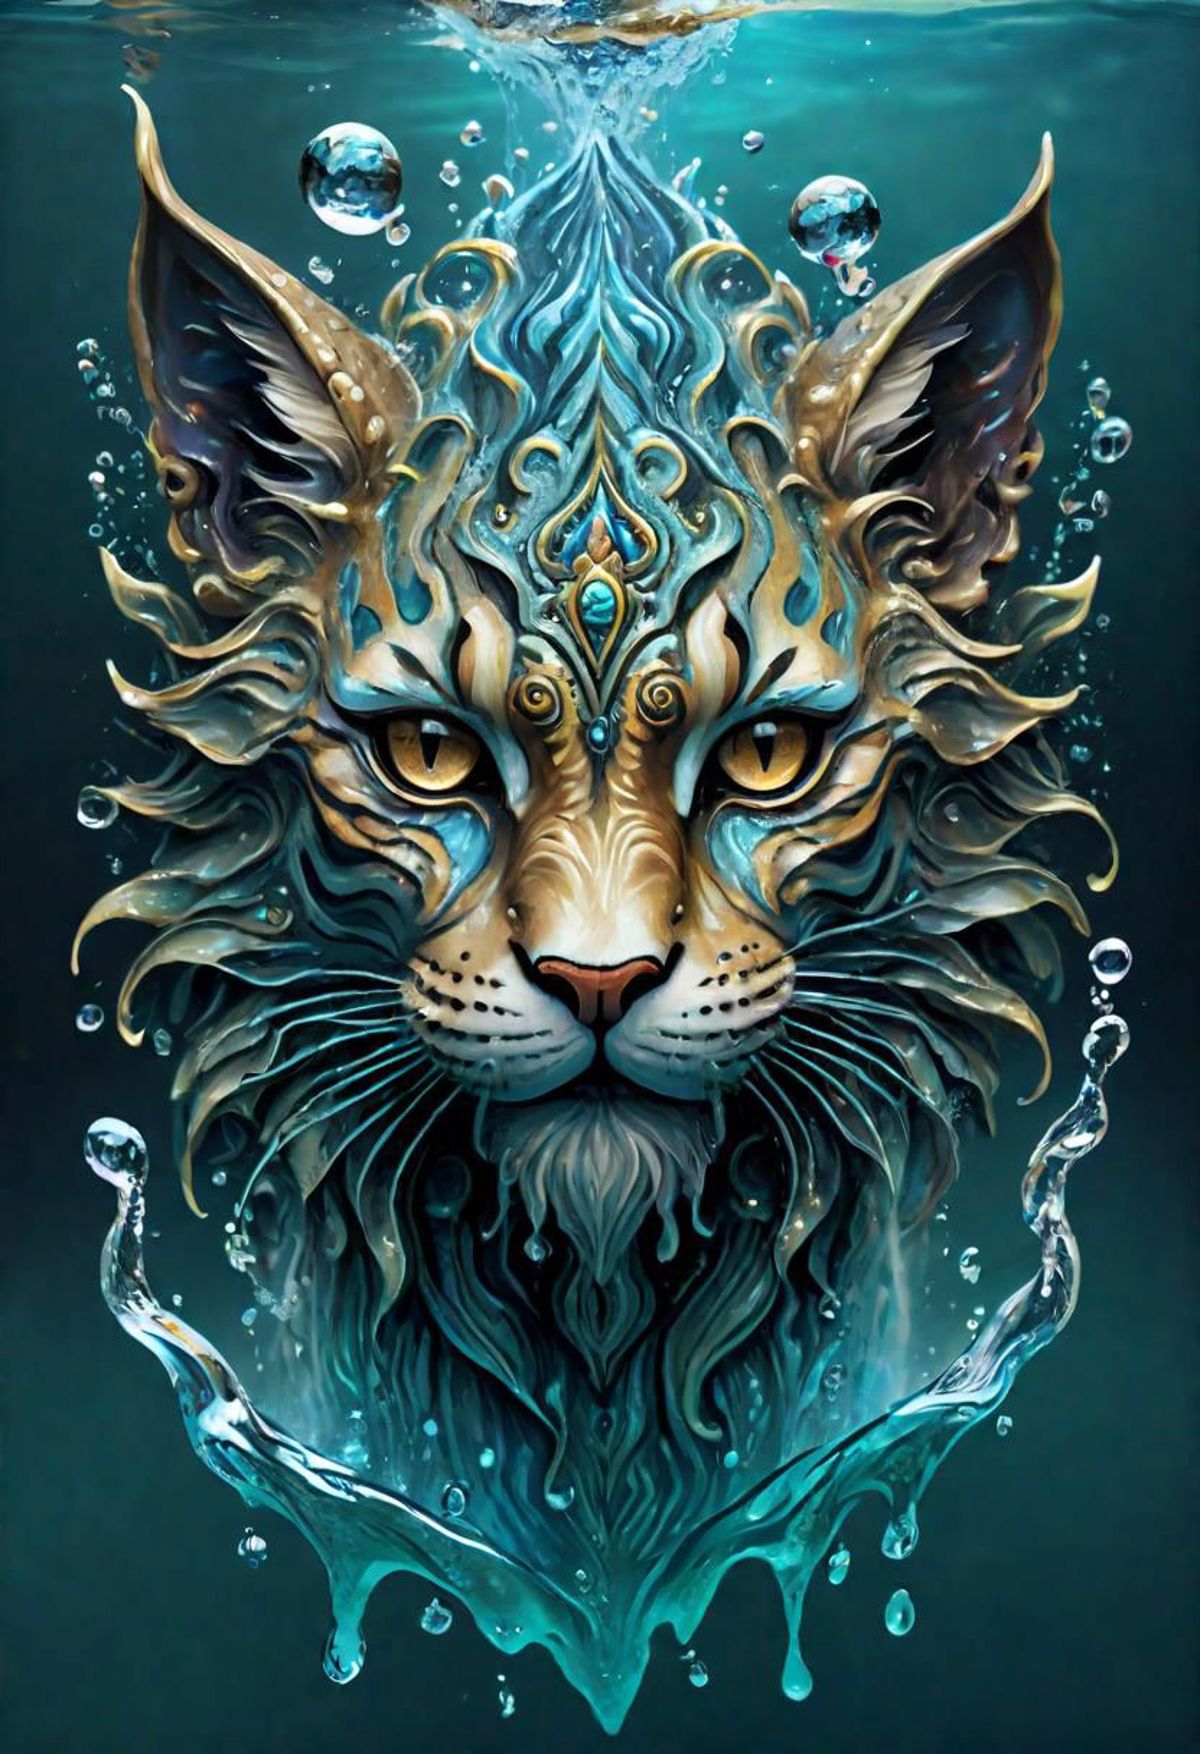 Artistic Cat Painting with Blue and Gold Colors in a Blue Aqua Background